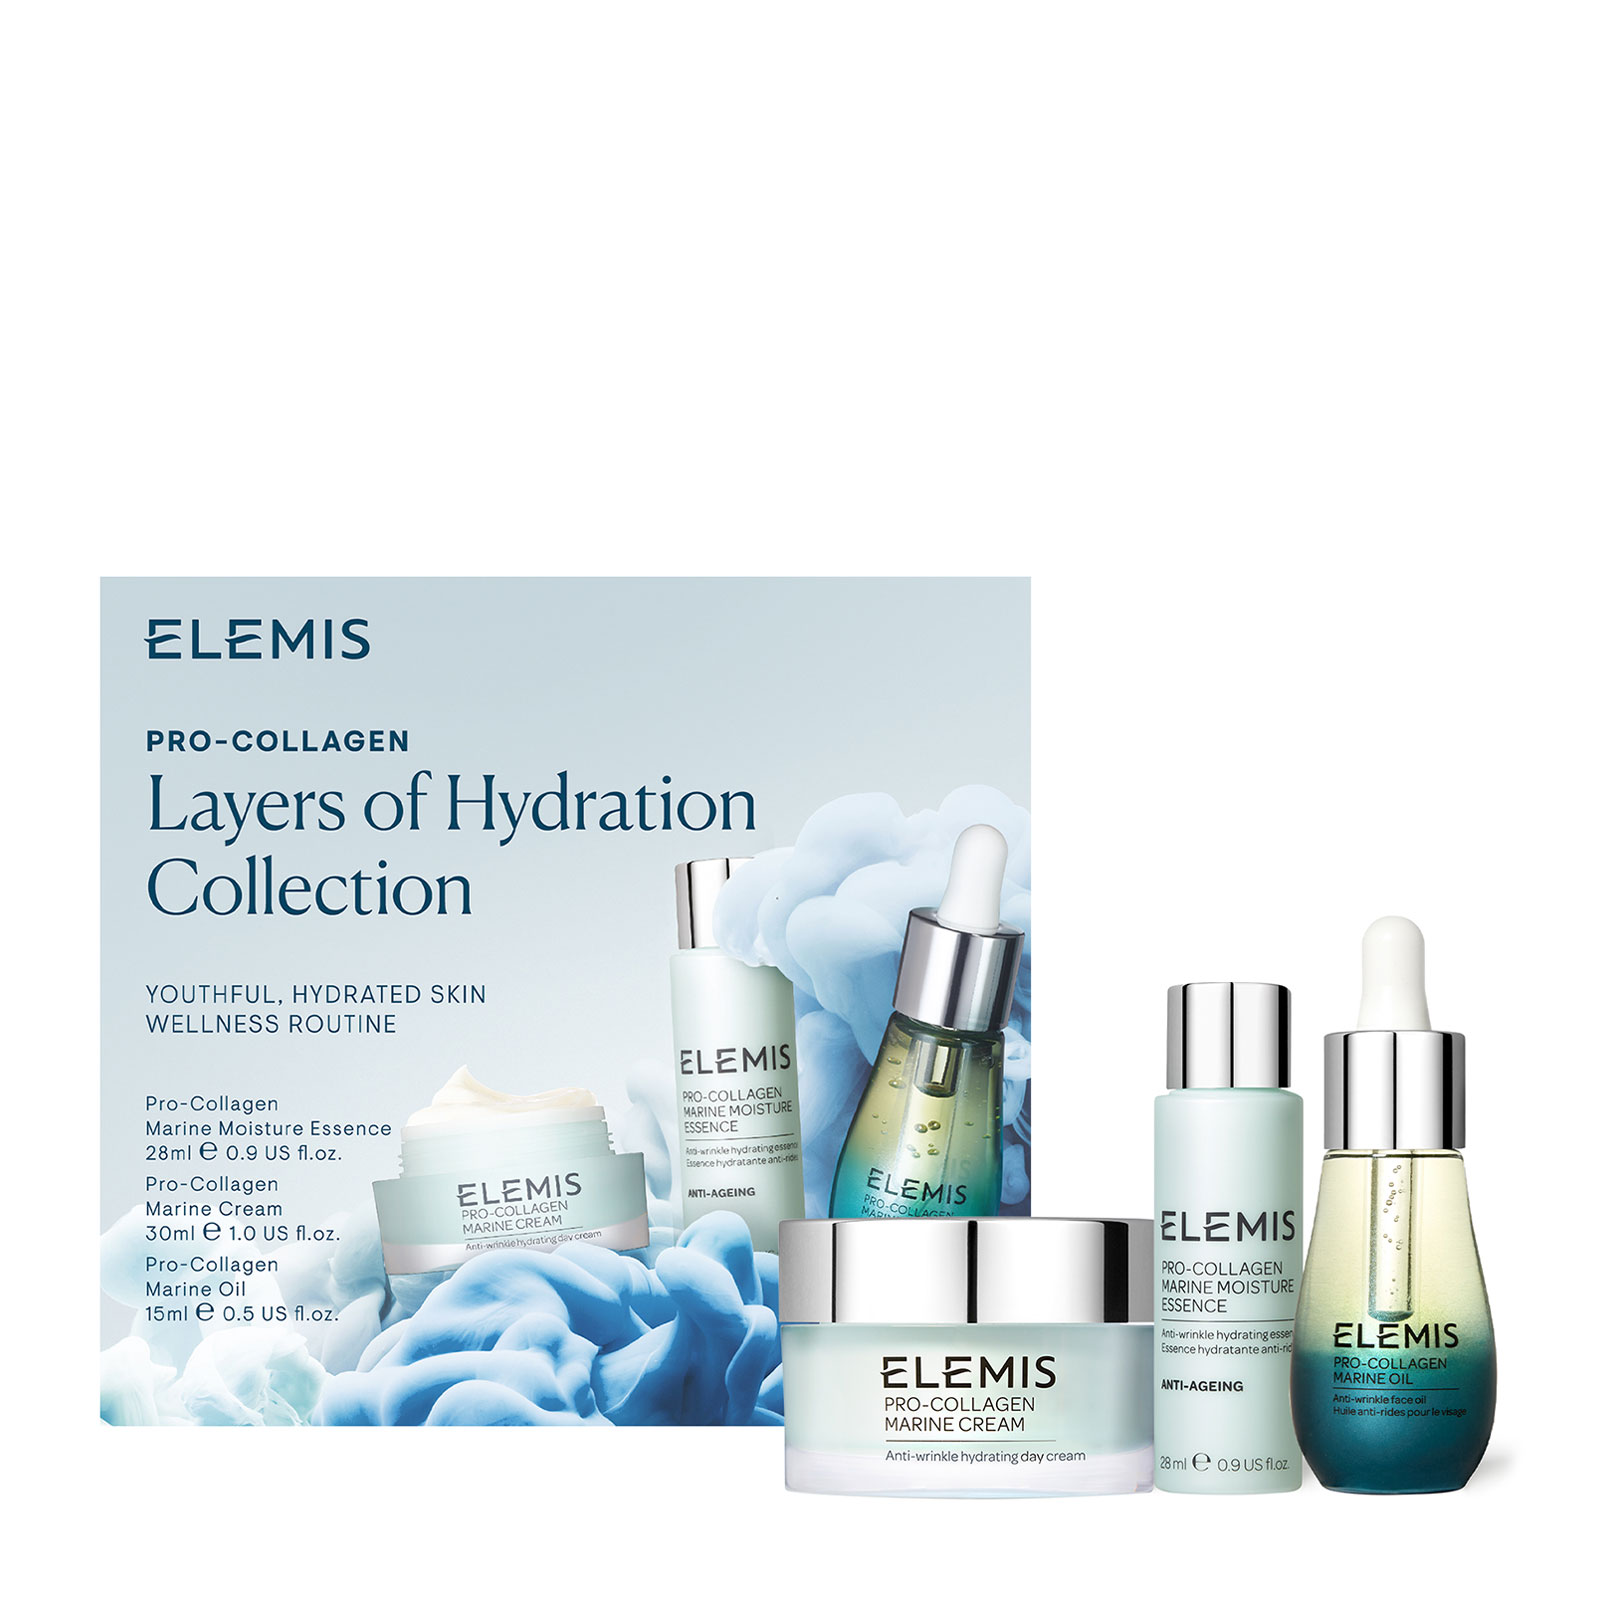 ELEMIS Pro-Collagen Layers of Hydration Collection